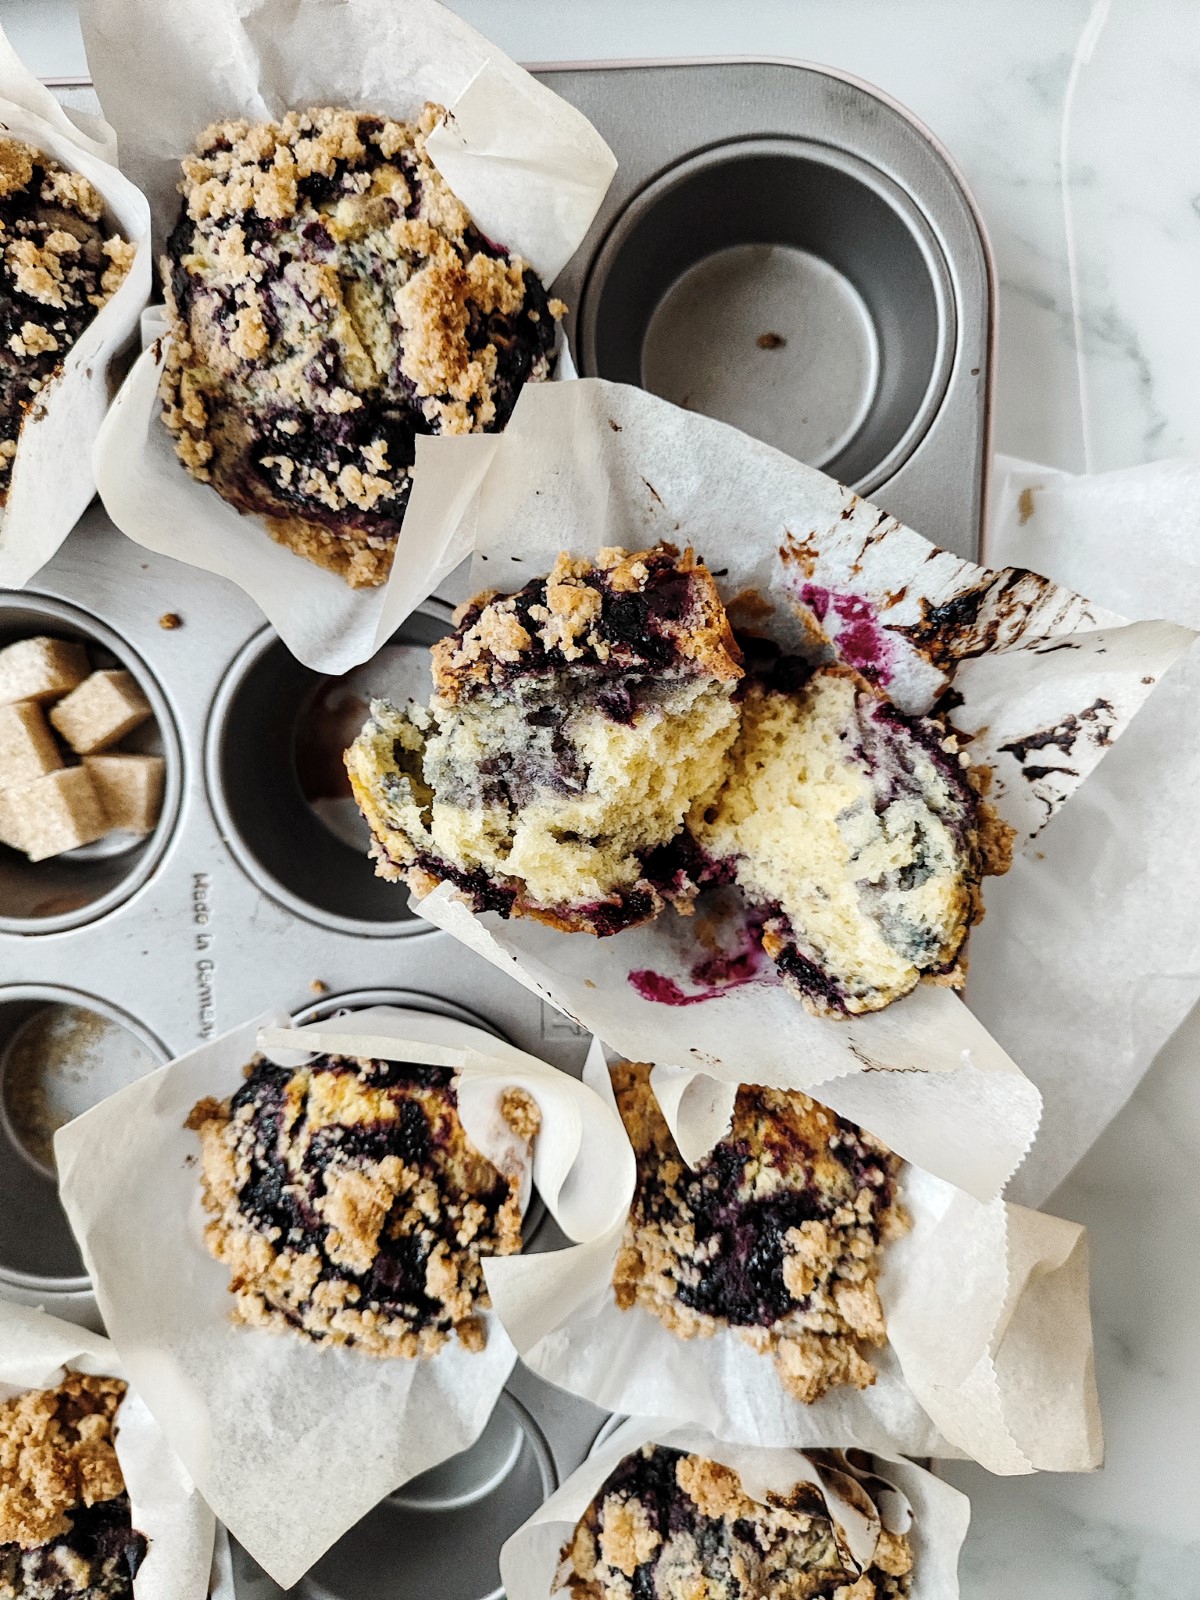 Heidelbeeren Muffins mit Crumble Topping - Title of the Recipe